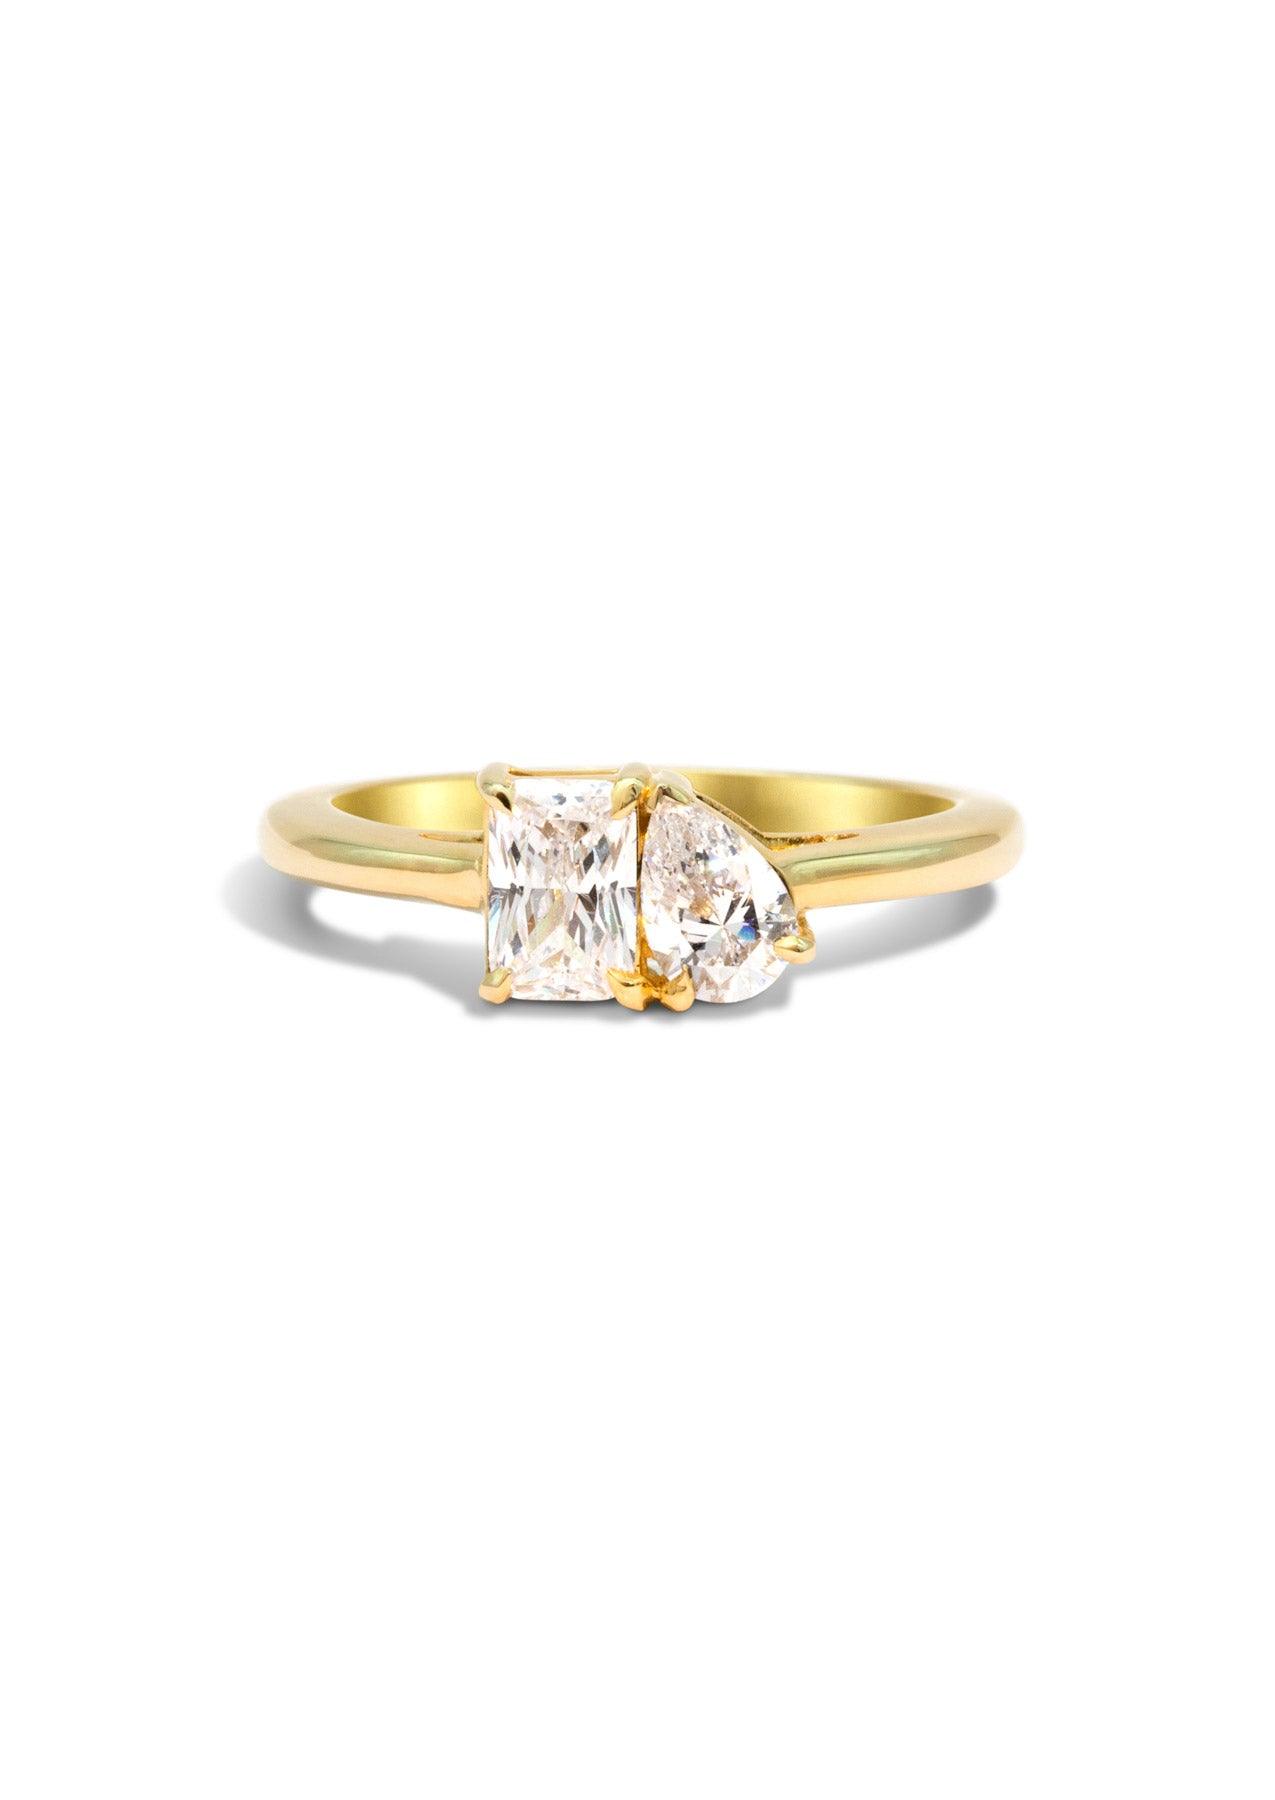 The Toi Et Moi Yellow Gold Cultured Diamond Ring